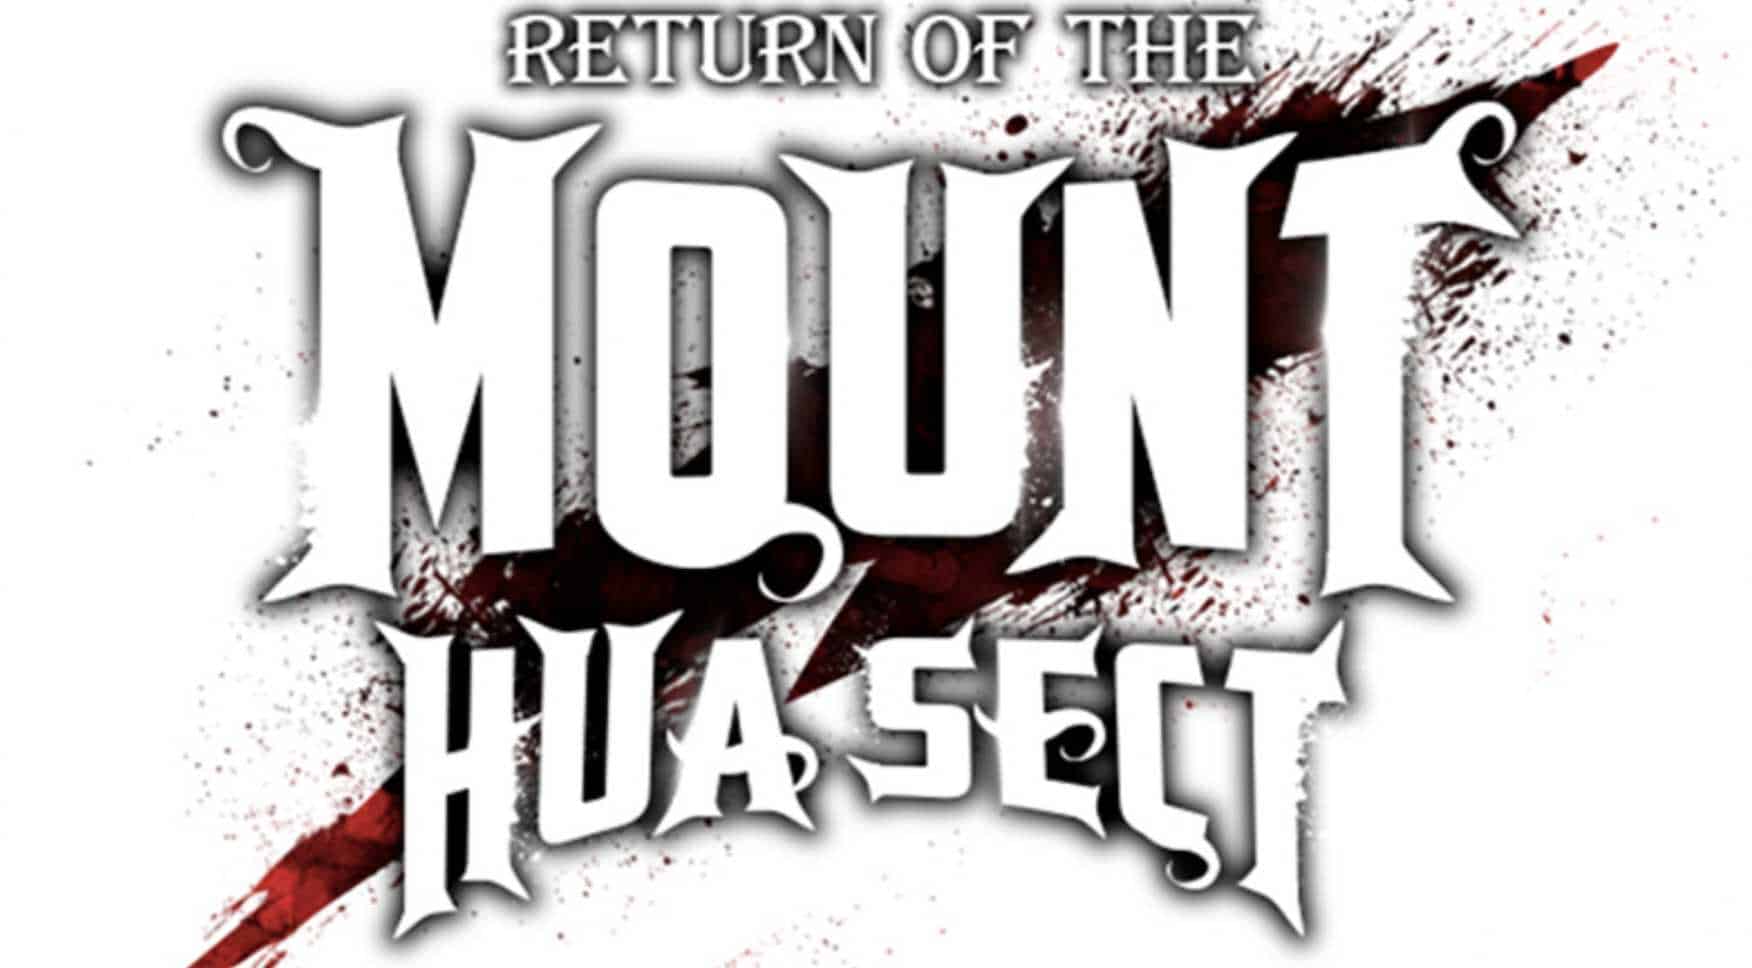 Return of the mount hua sect1